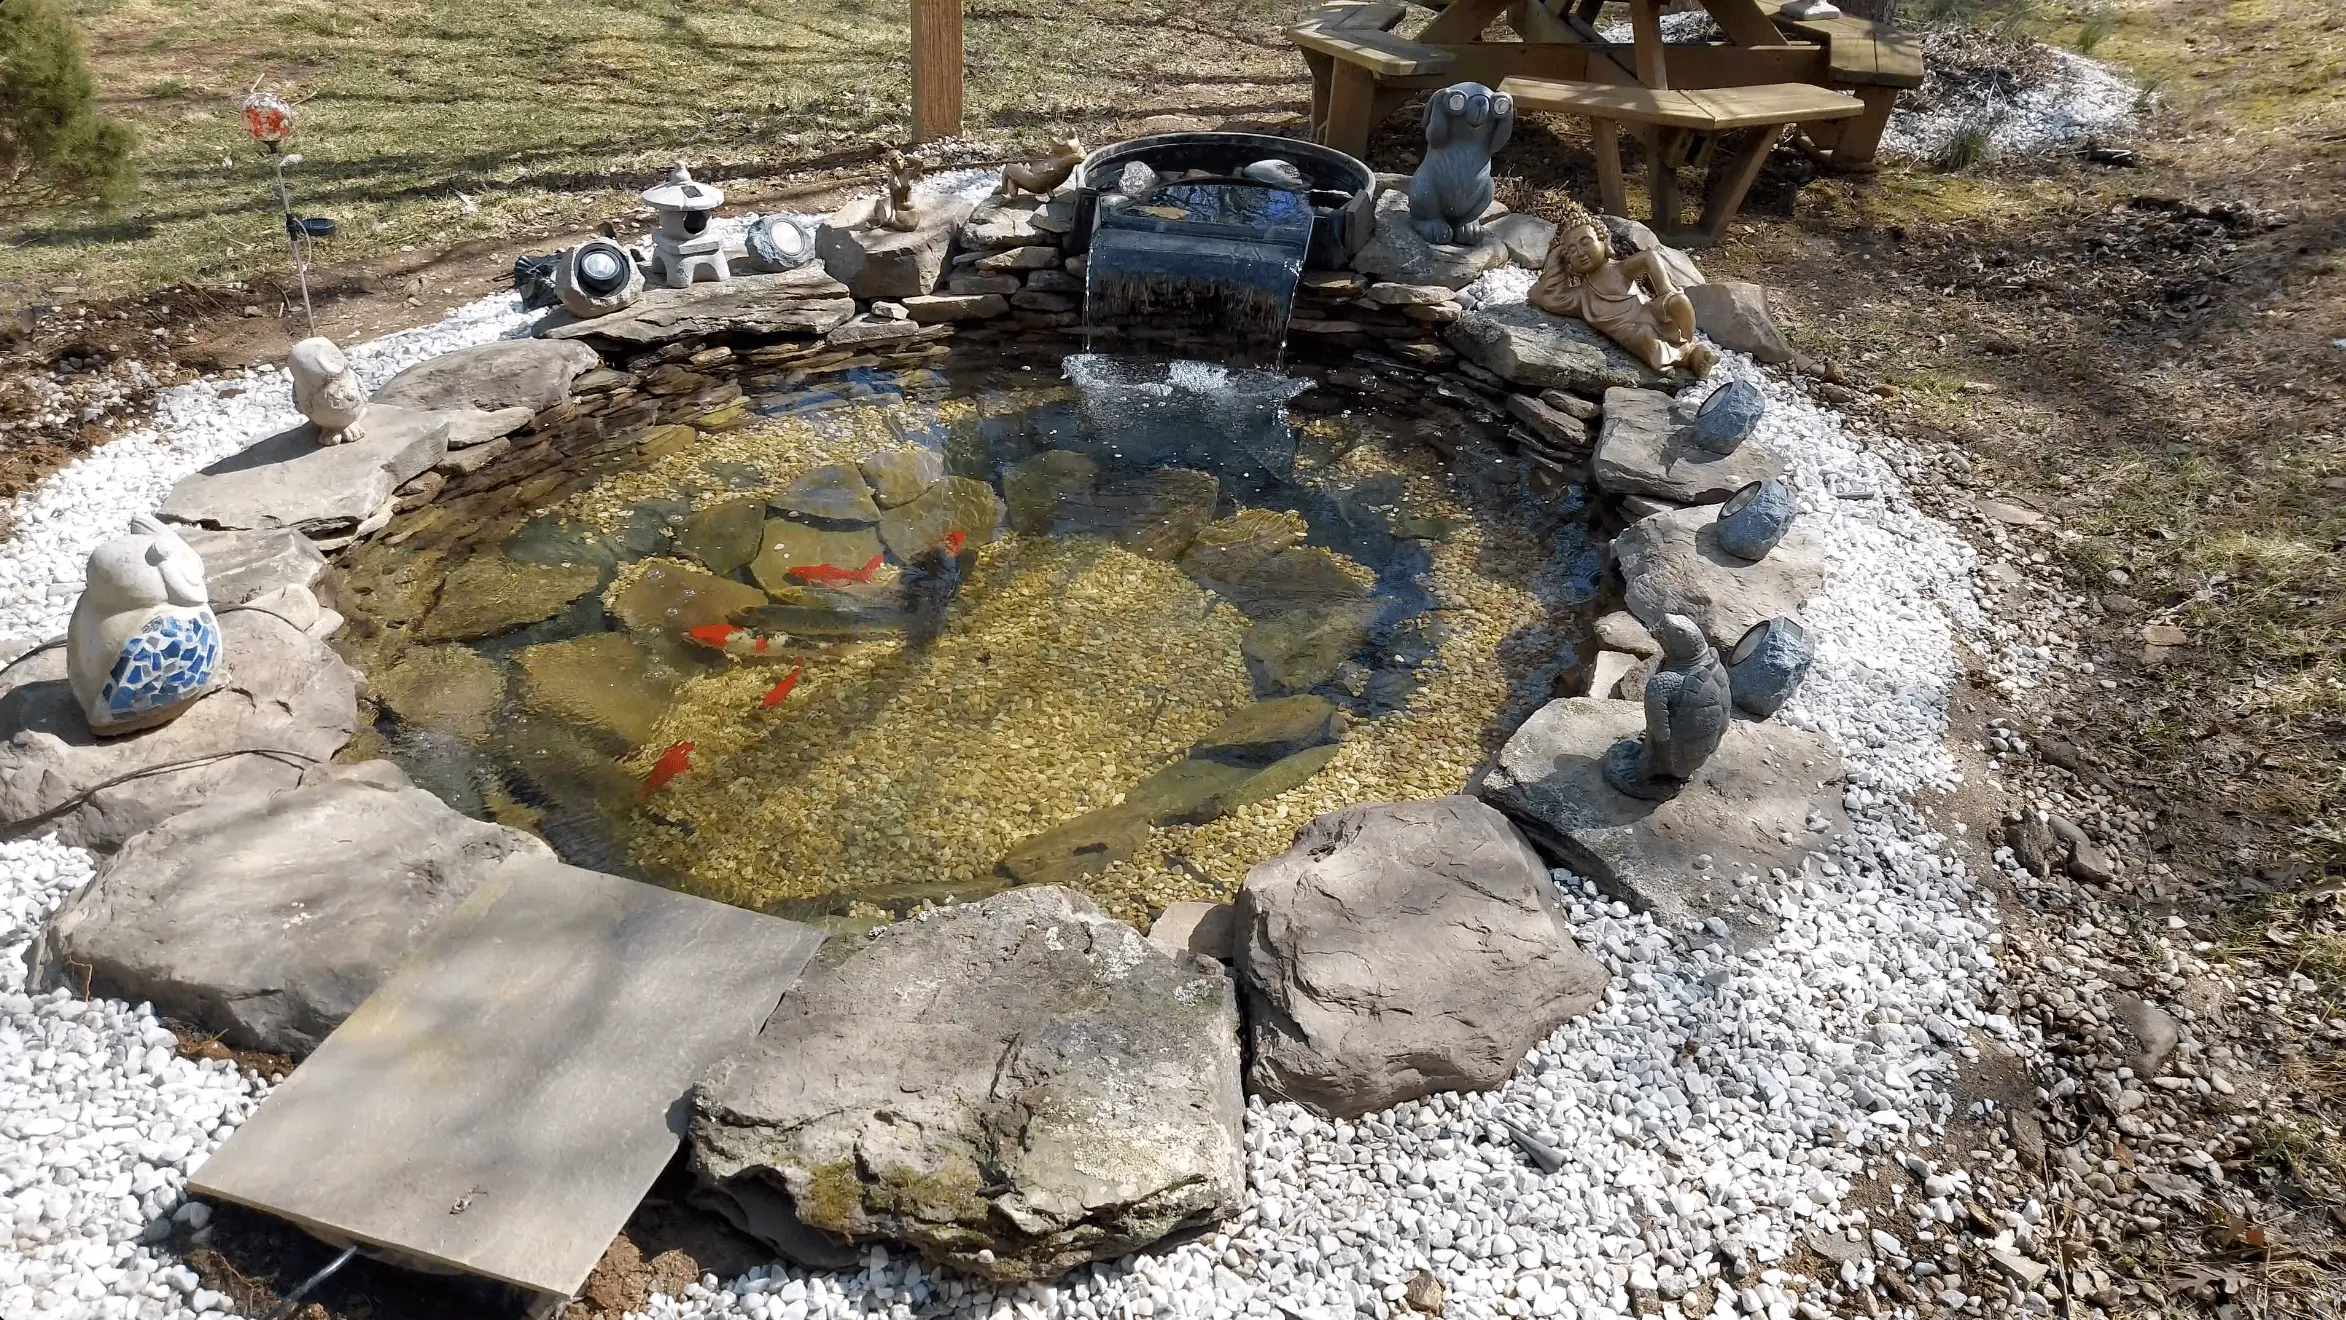 A pond's maintenance needs depends on many factors. Its location can play a big role as intense sunlight exposure and nearby trees can create algae and muck. Its depth and total water volume are also contributors as deeper ponds with more water stay clear longer. Lastly, bioload and filtration are important things to consider for a low-maintenance pond.
					